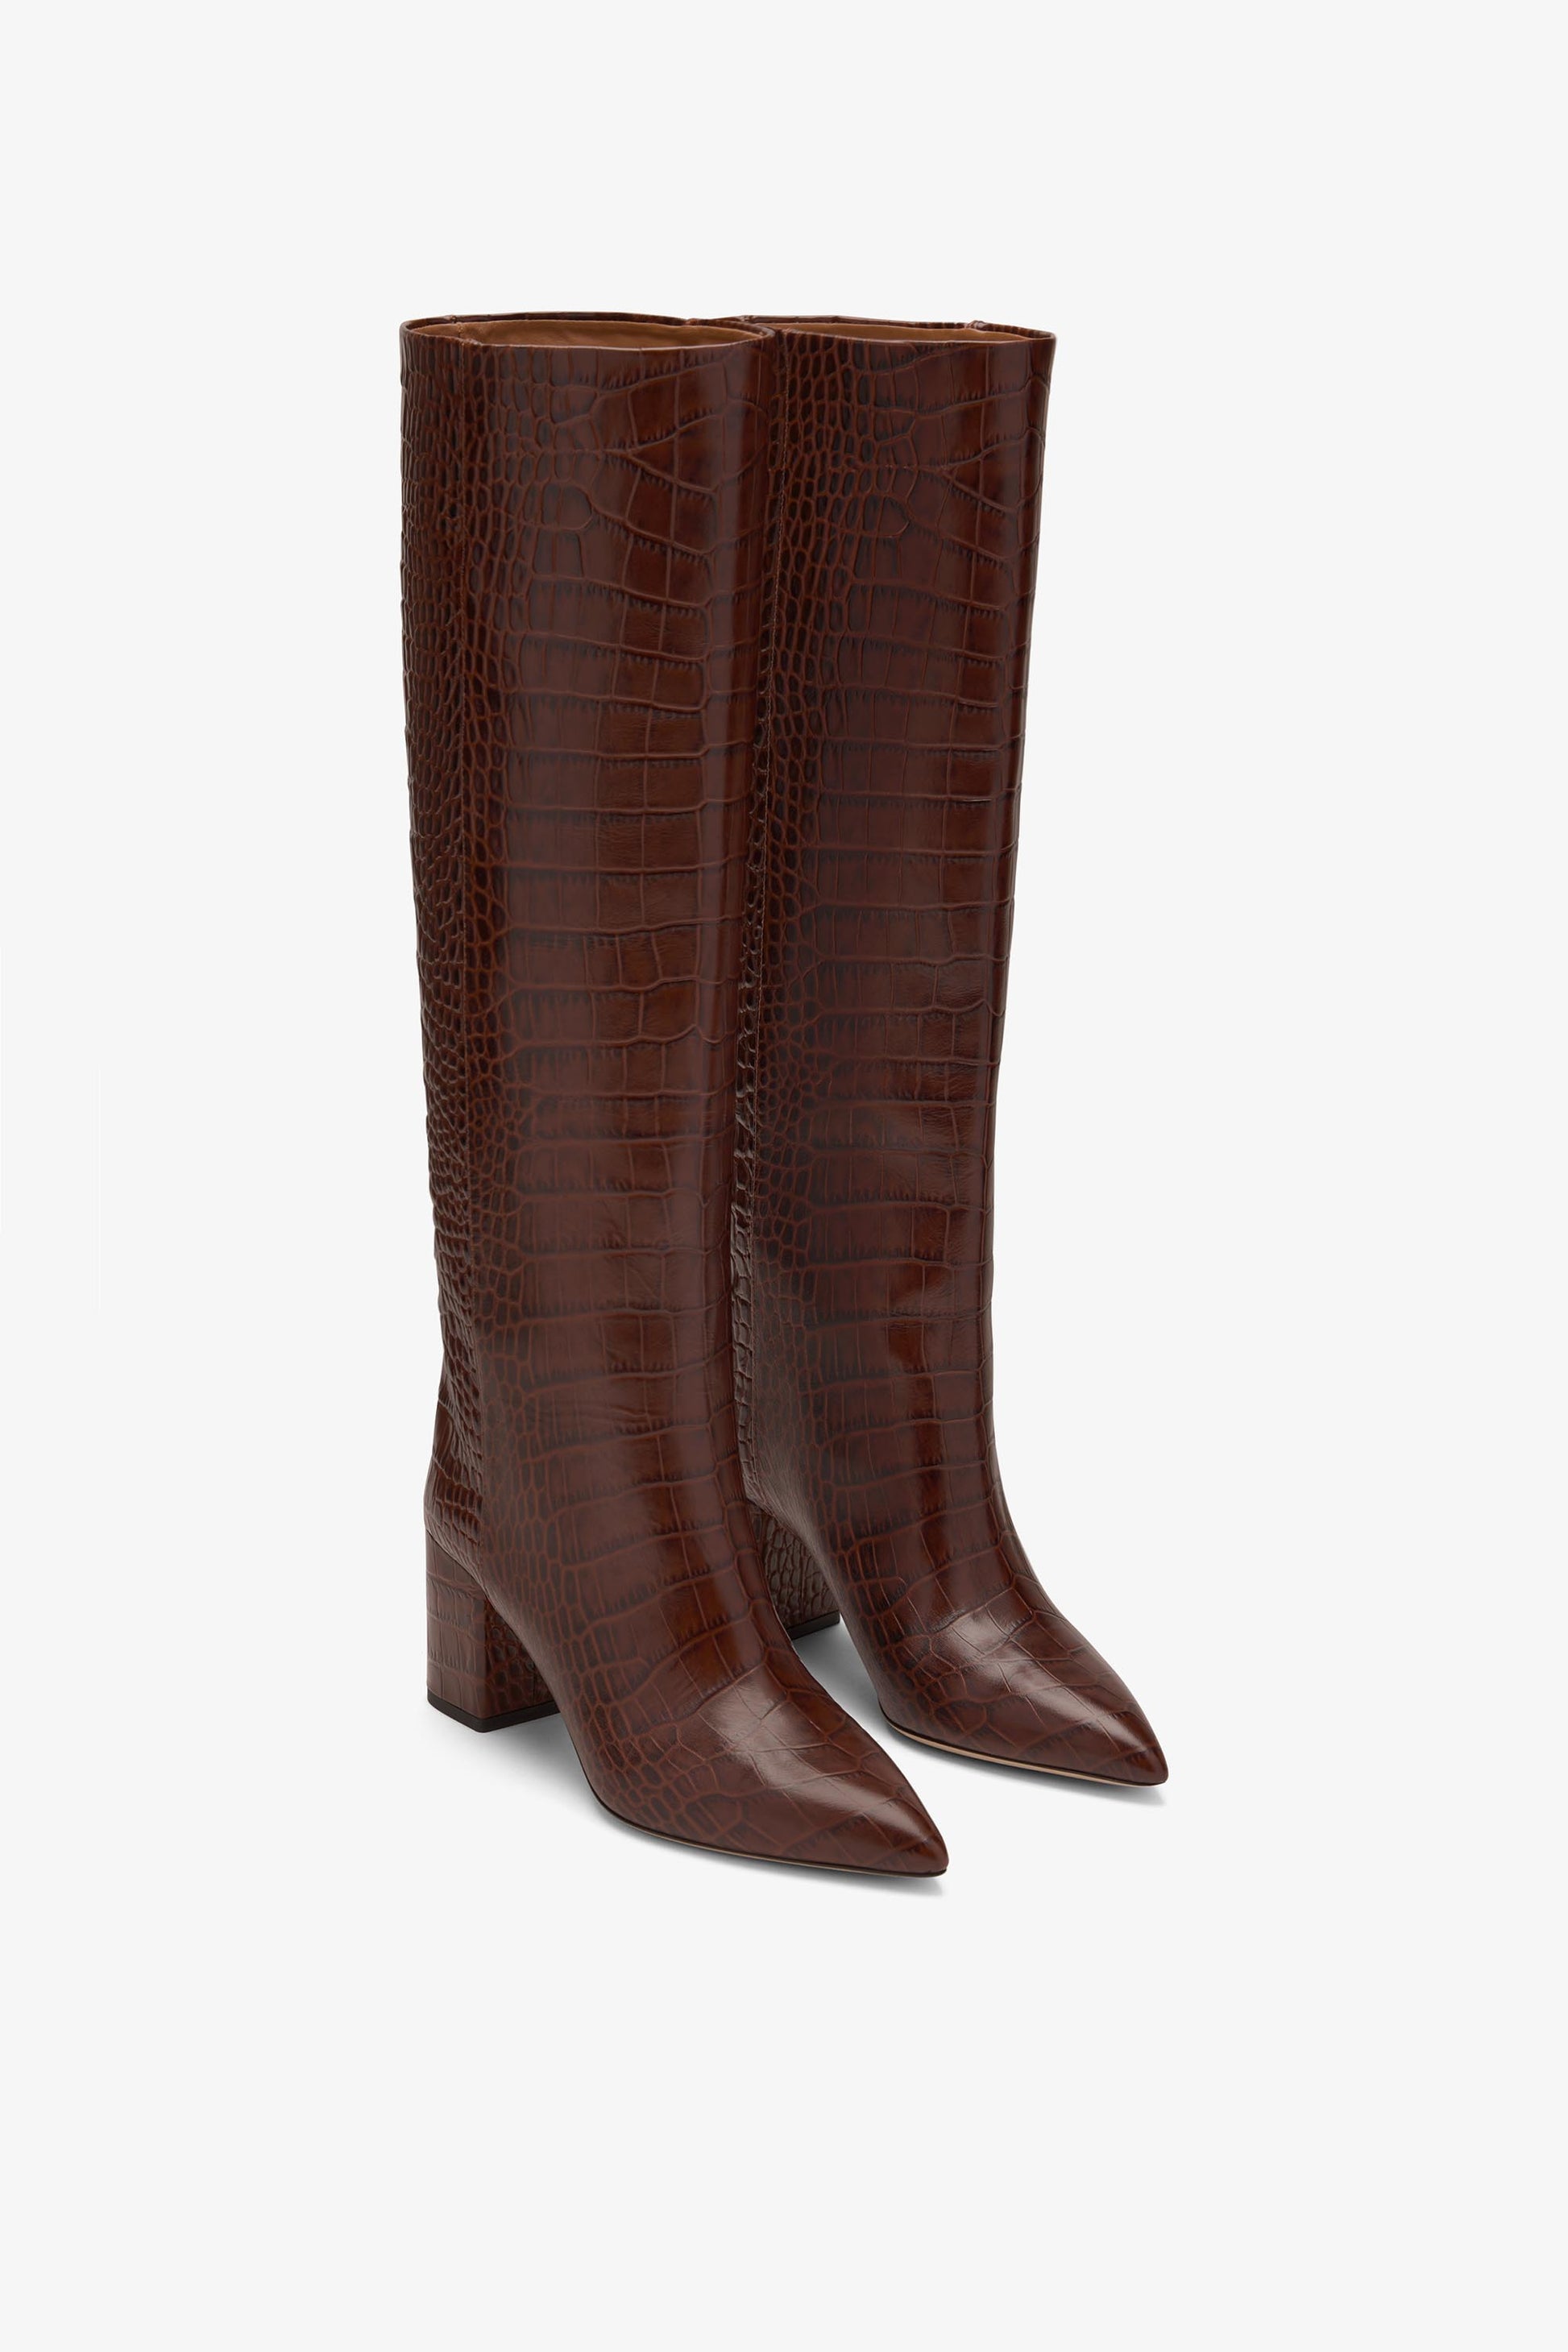 Chocolate brown croc-effect leather heel 70 boots